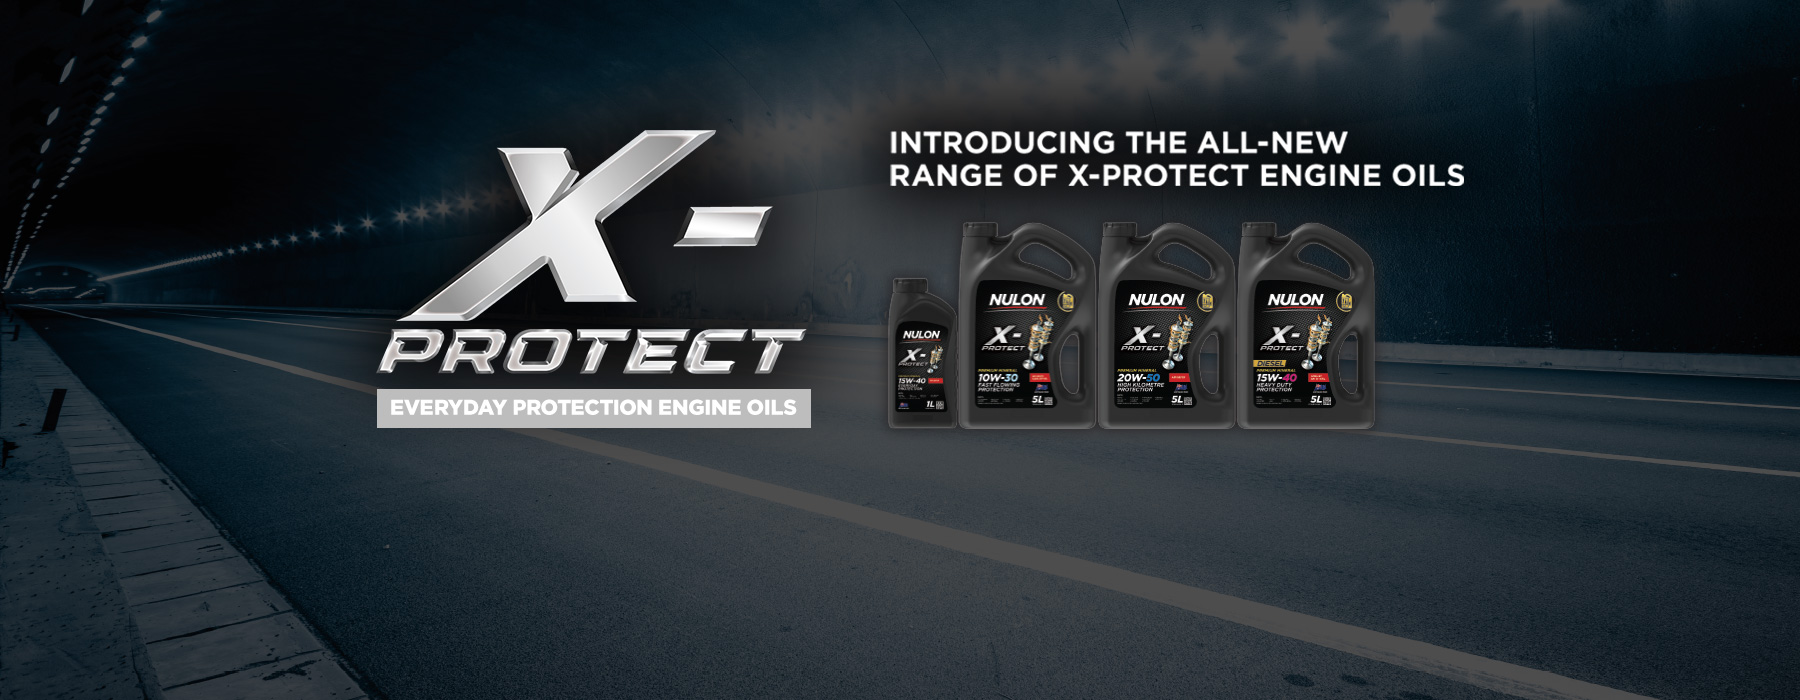 X-Protect Everyday Protection Engine Oils